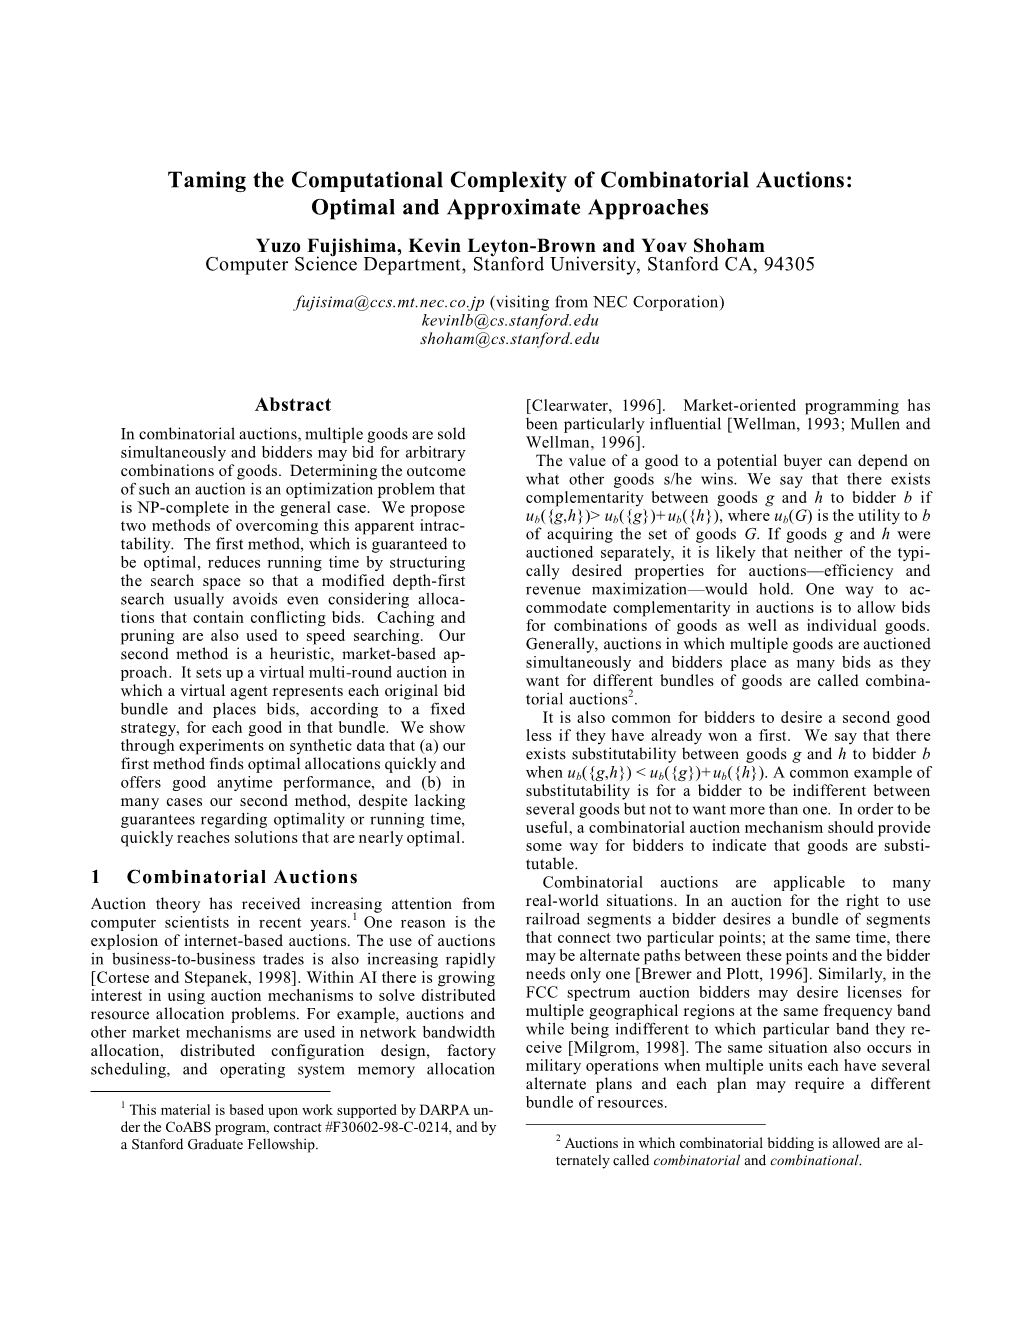 Taming the Computational Complexity of Combinatorial Auctions: Optimal